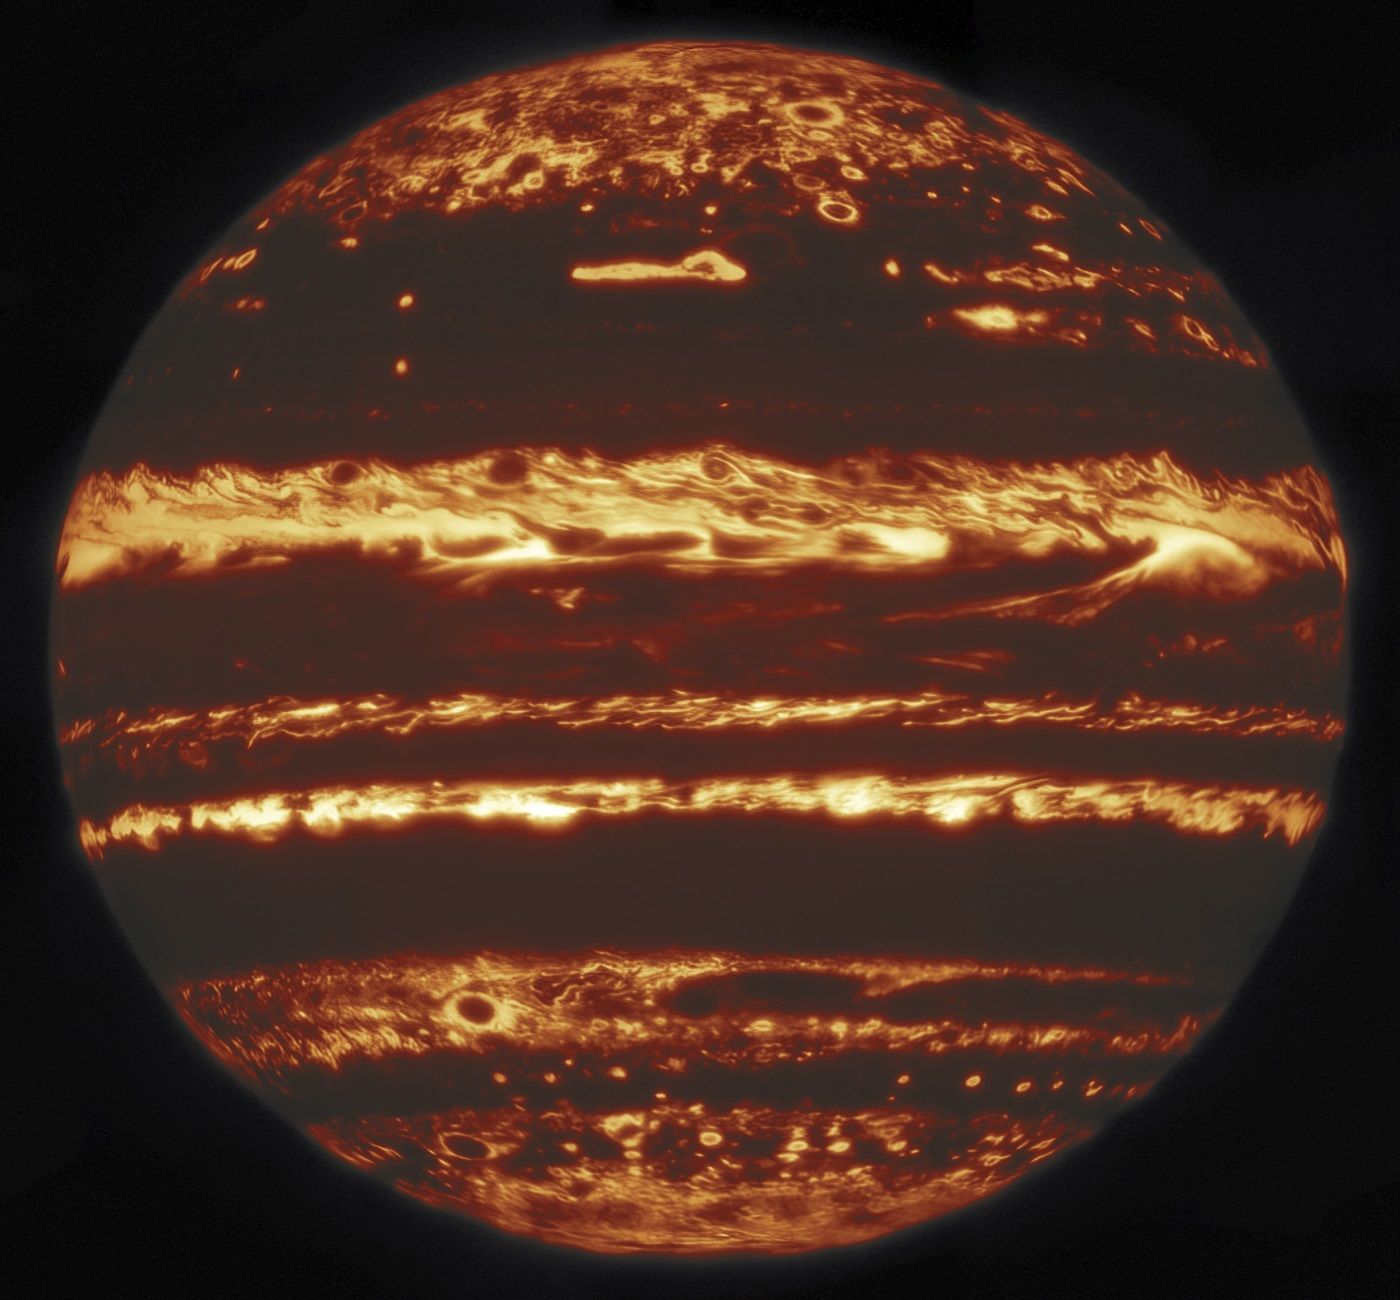 Jupiter in thermal infrared light; bright regions are clear air where heat from inside the planet can leak out, while darker regions are where clouds block that heat.